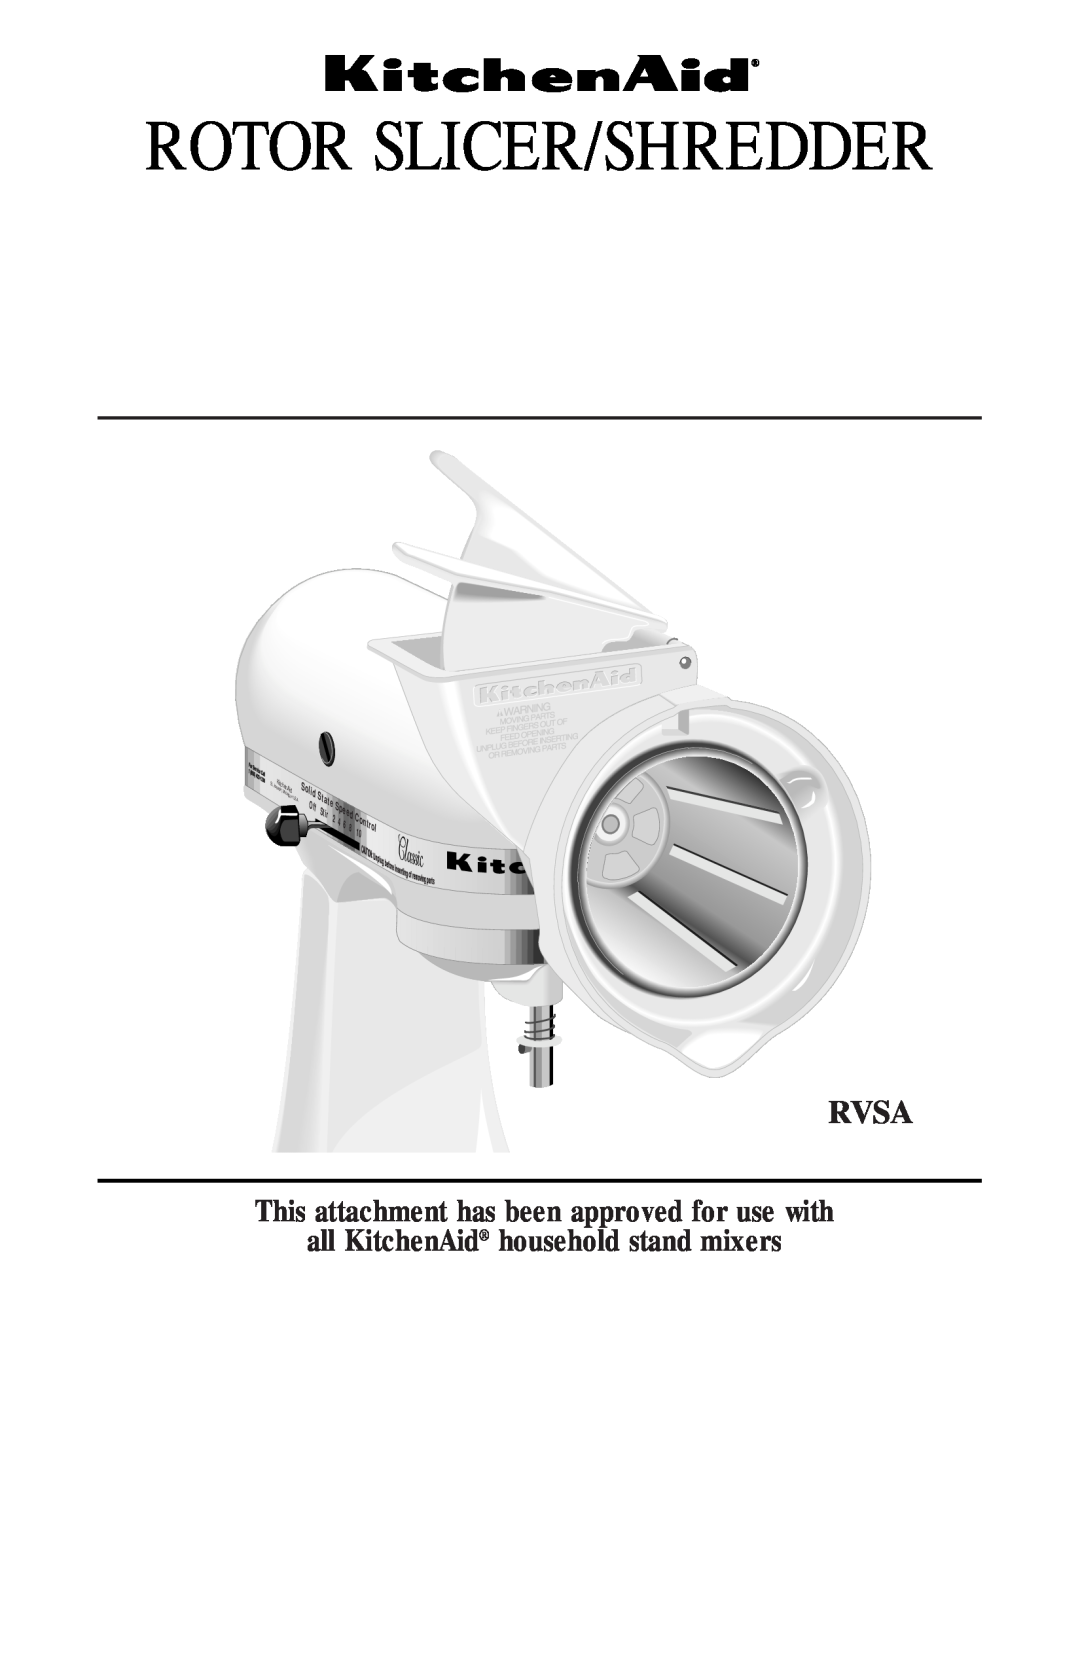 KitchenAid 221 manual This attachment has been approved for use with, all KitchenAid household stand mixers, Rvsa, Control 